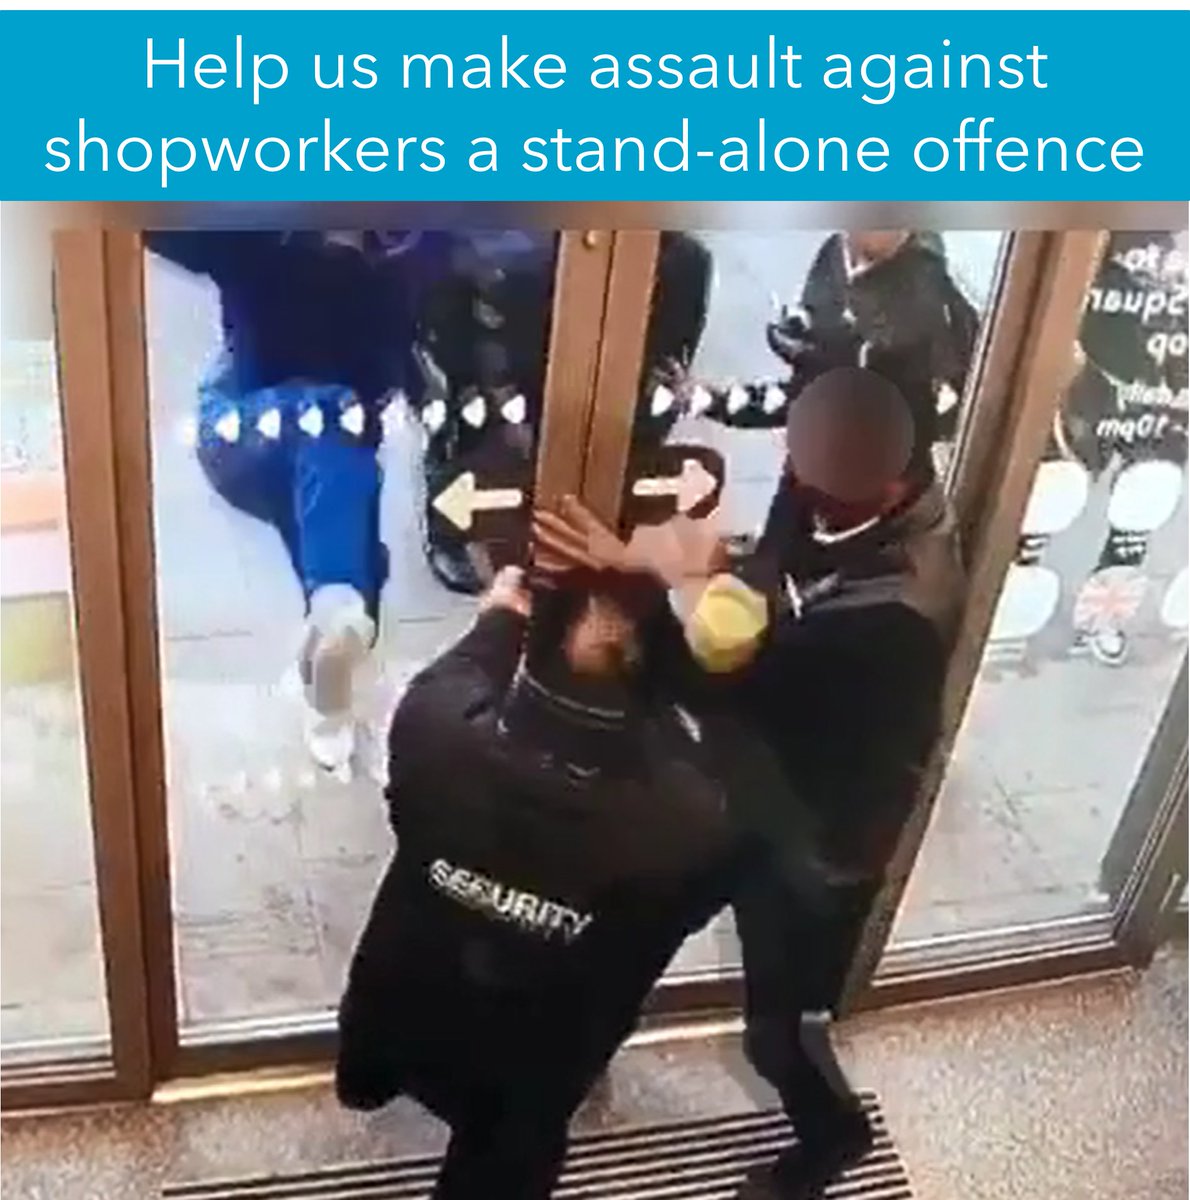 Tell your local MP to back the amendment to the Criminal Justice Bill. The amendment would see assault against shopworkers become a stand-alone offence, and help us take action to keep all retail colleagues and communities safe: coop.uk/48bJ283